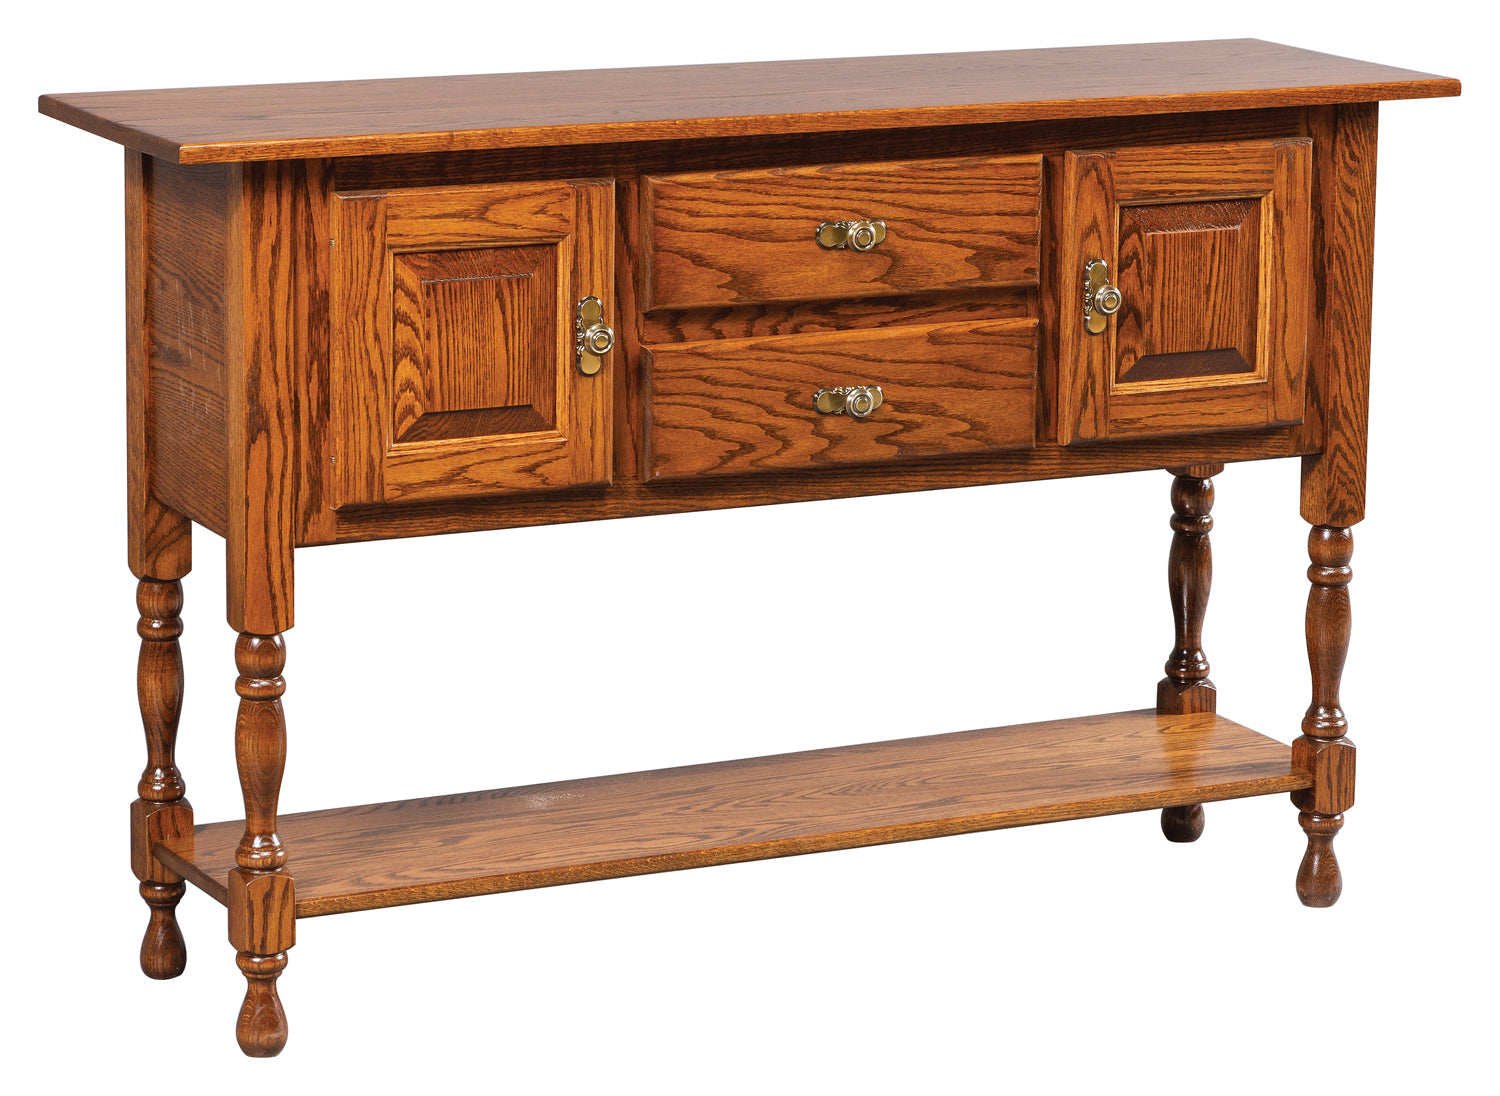 Amish 56" Classic Sideboard with Shelf